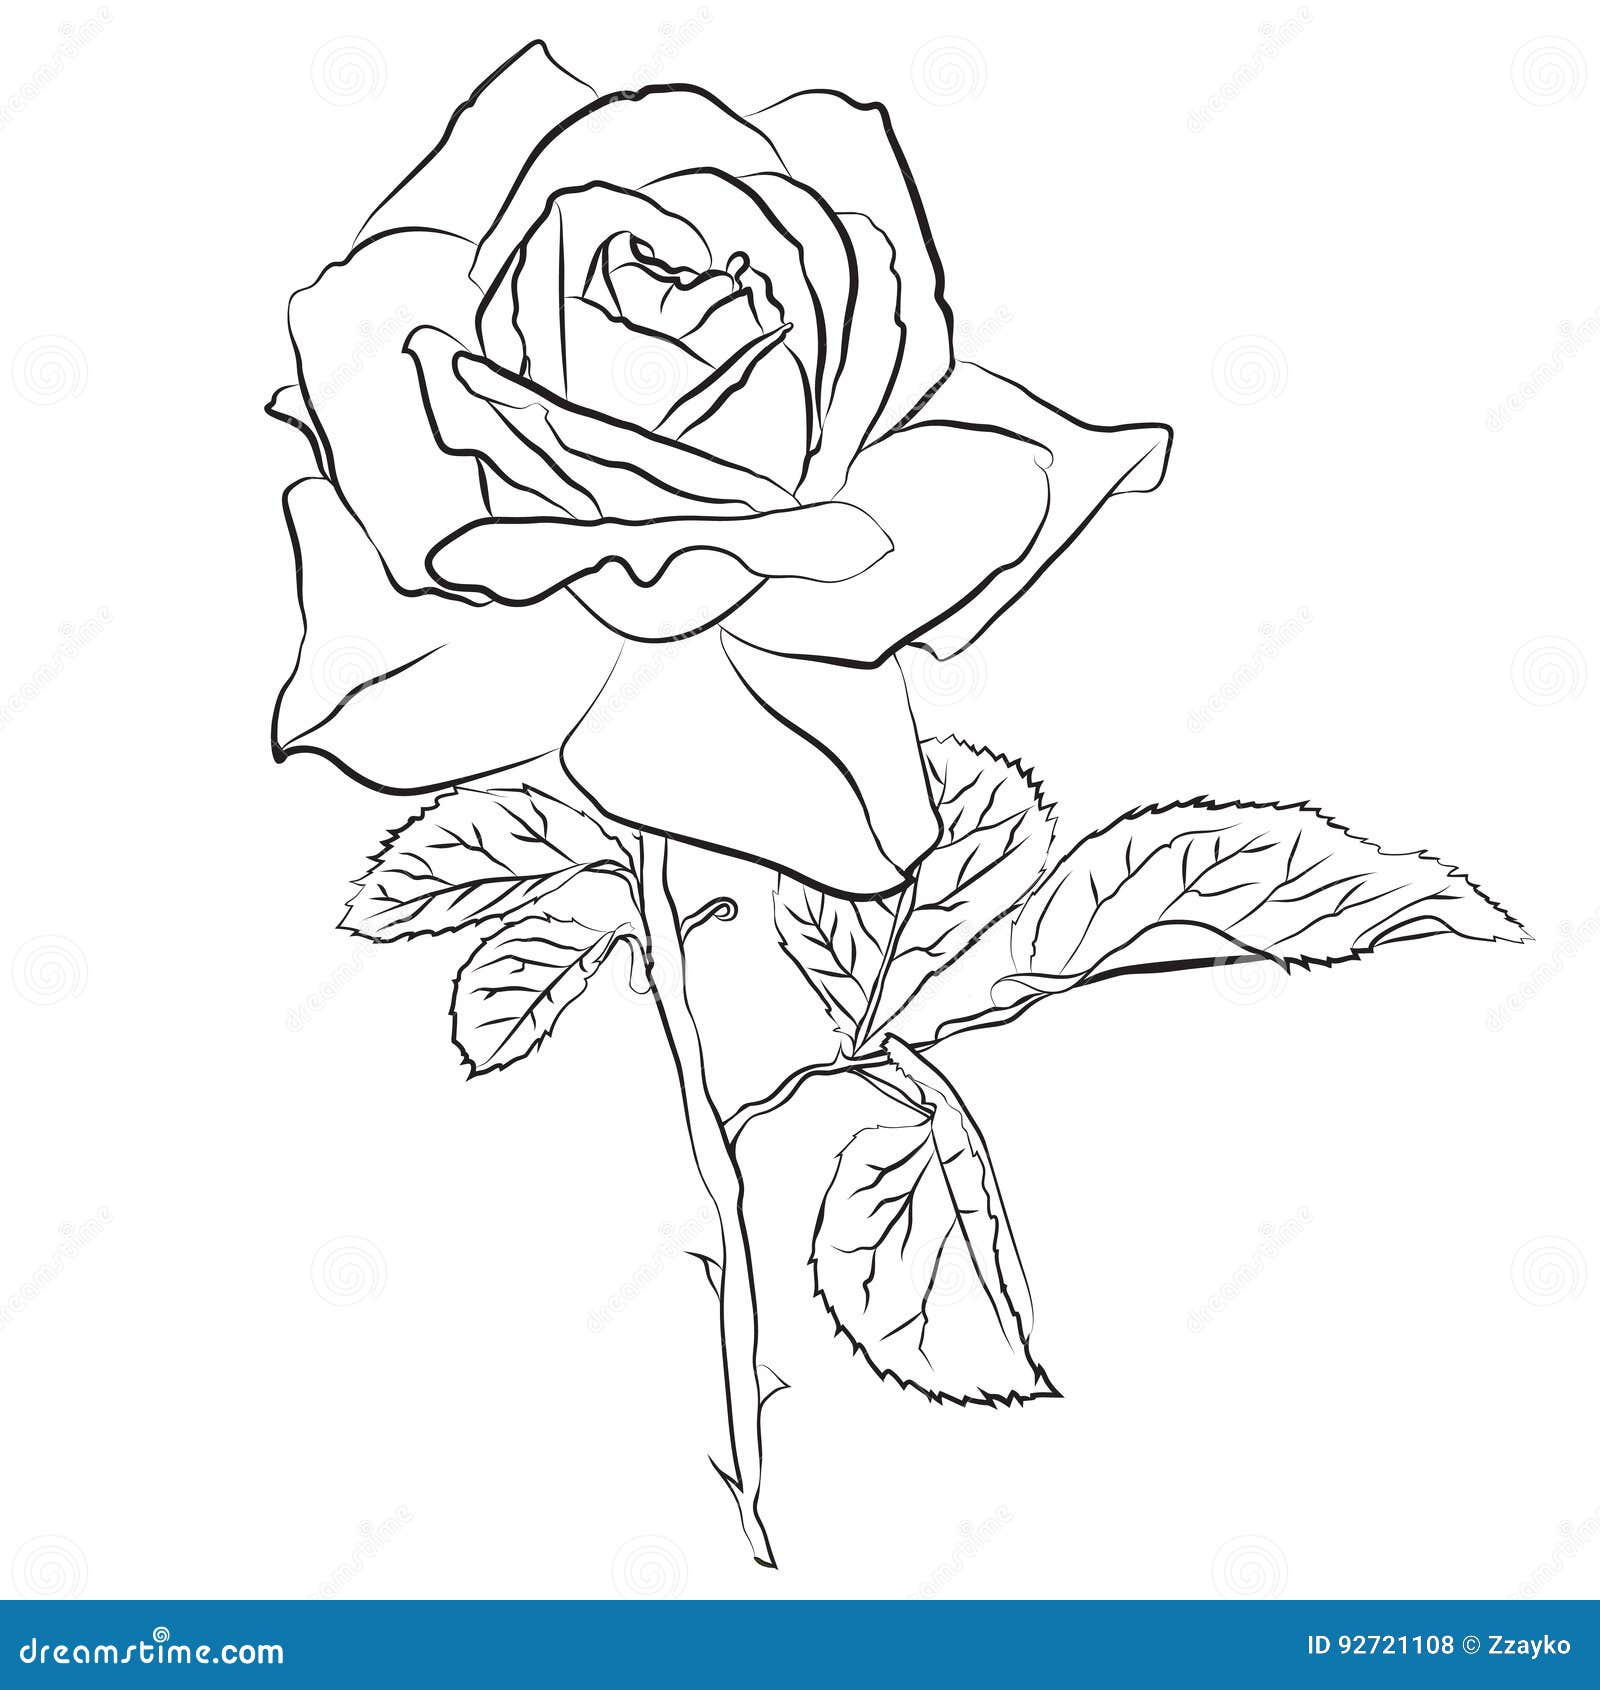 Beautiful Hand Drawn Sketch Rose, Isolated Black Contur on White ...